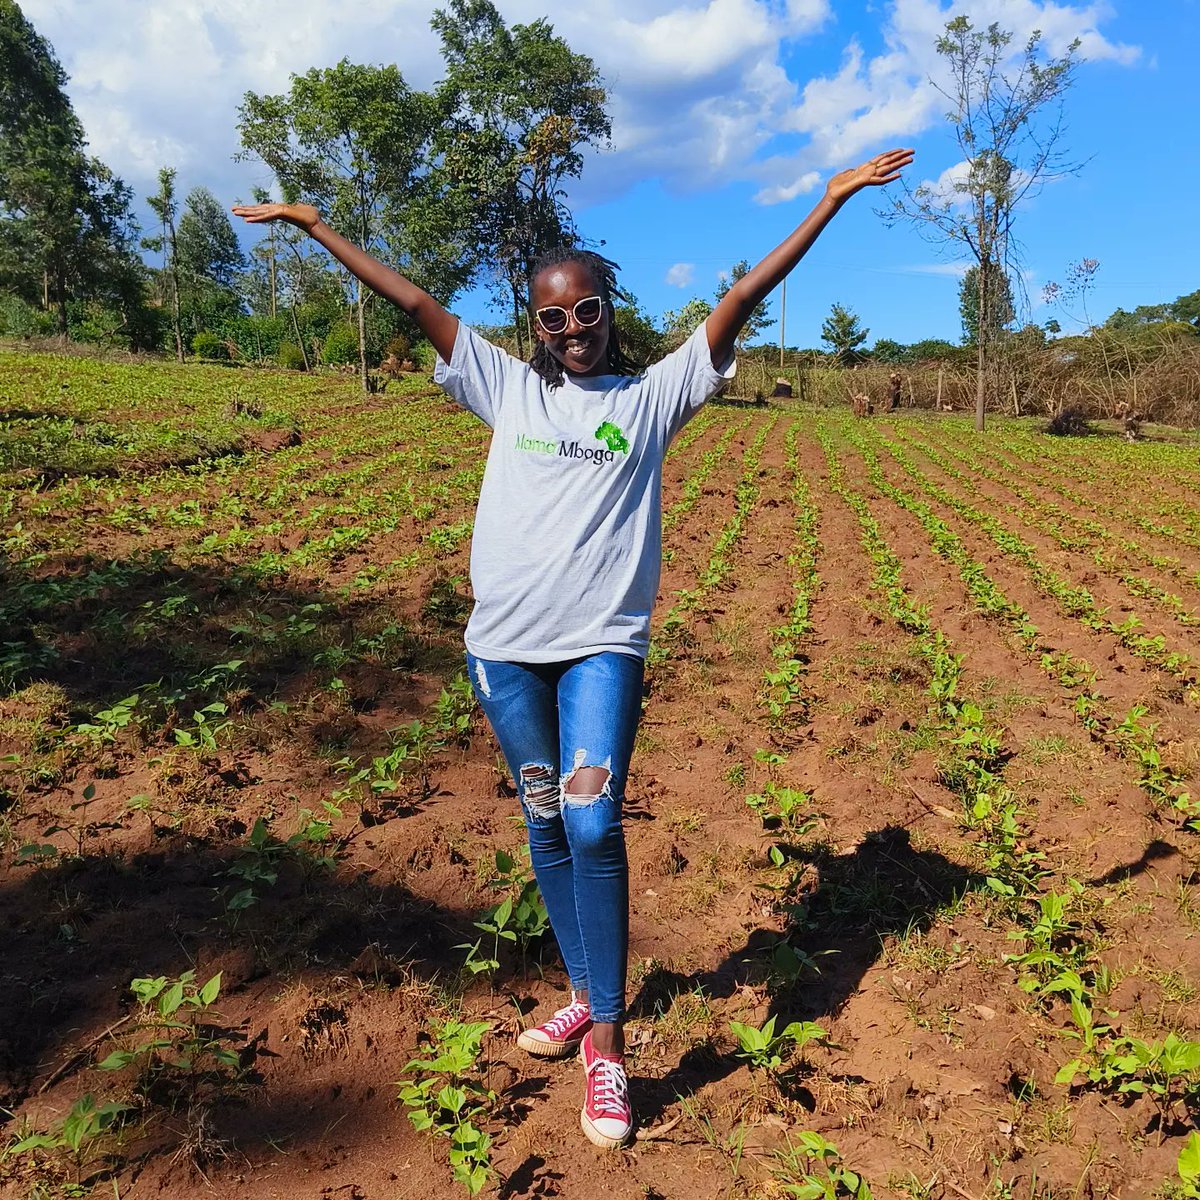 Continual effort begets success in Farming. Over the weekend with my girlies pale shambani checking progress ya Bubayi KK8 bean variety while trusting the process to fruition. @Chero_Sharon @MamaMbogaKe